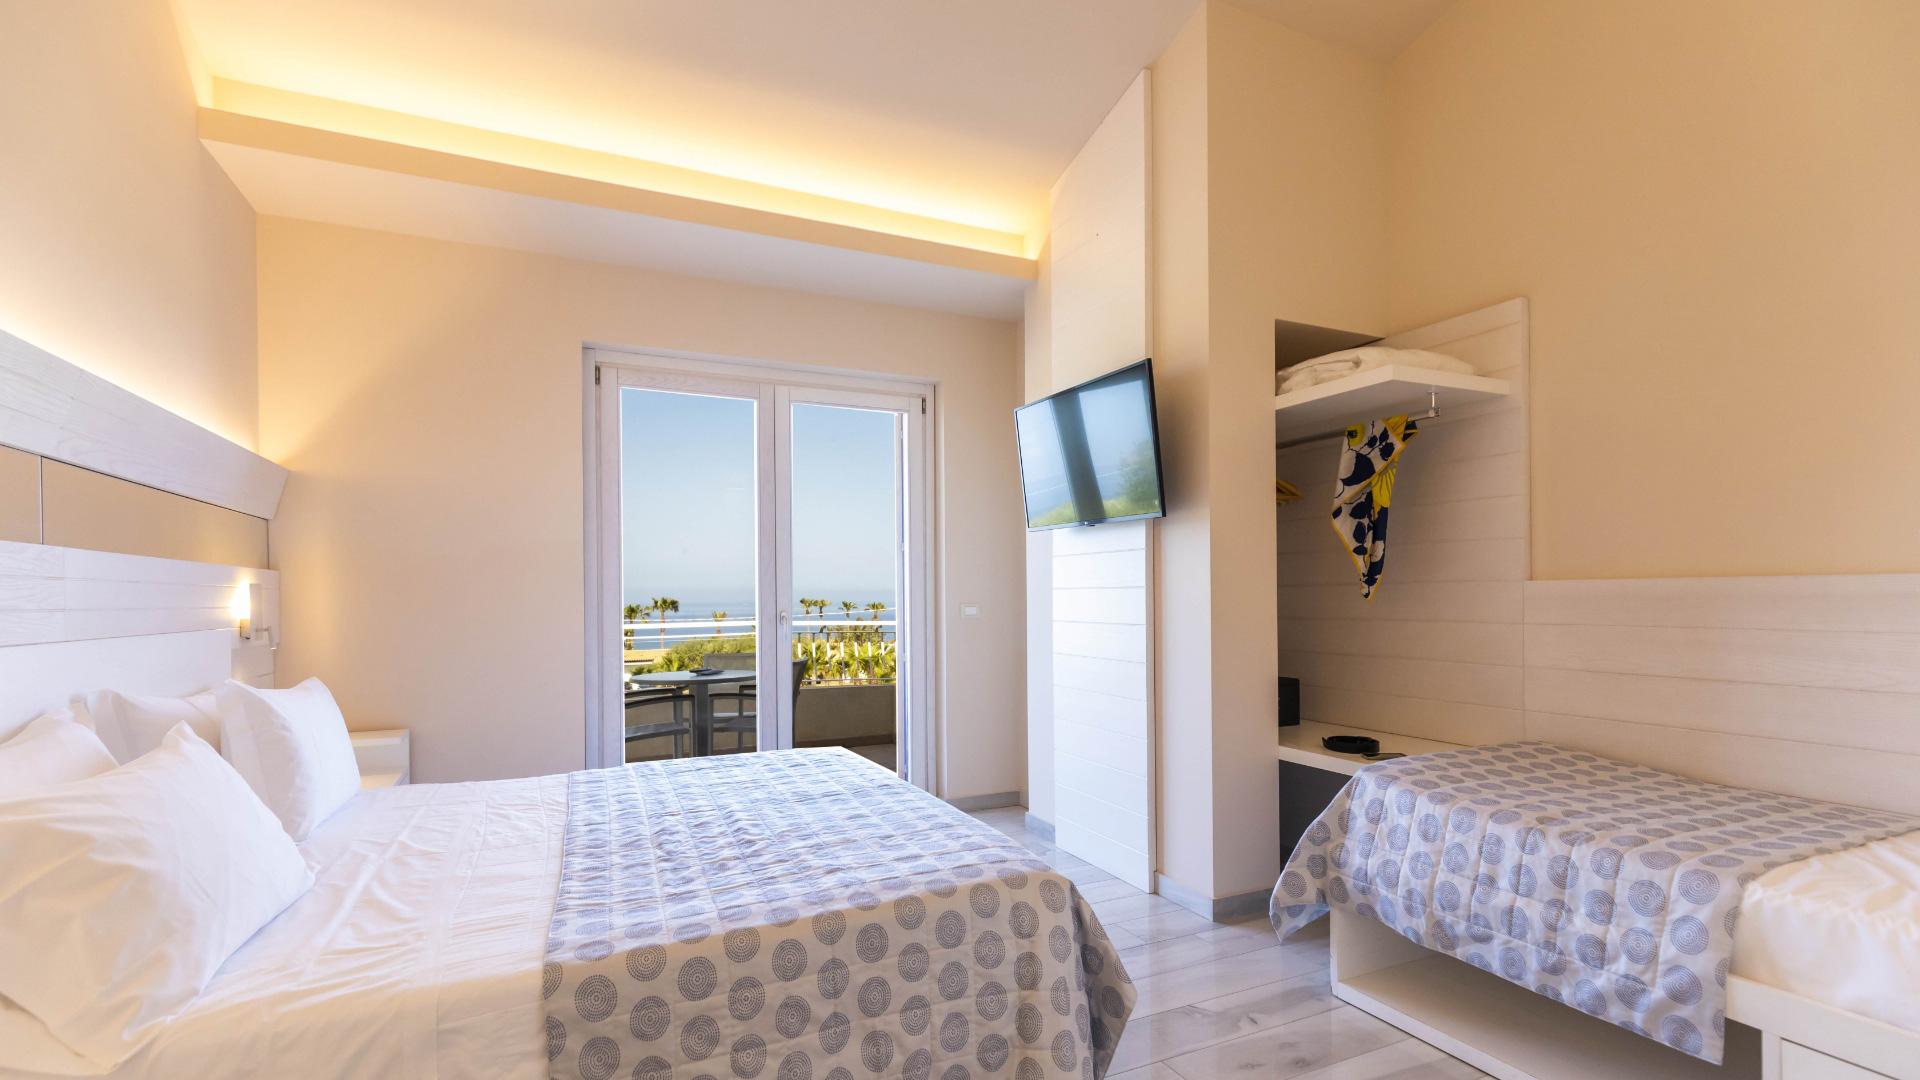 Bright room with sea view, double bed and single bed.